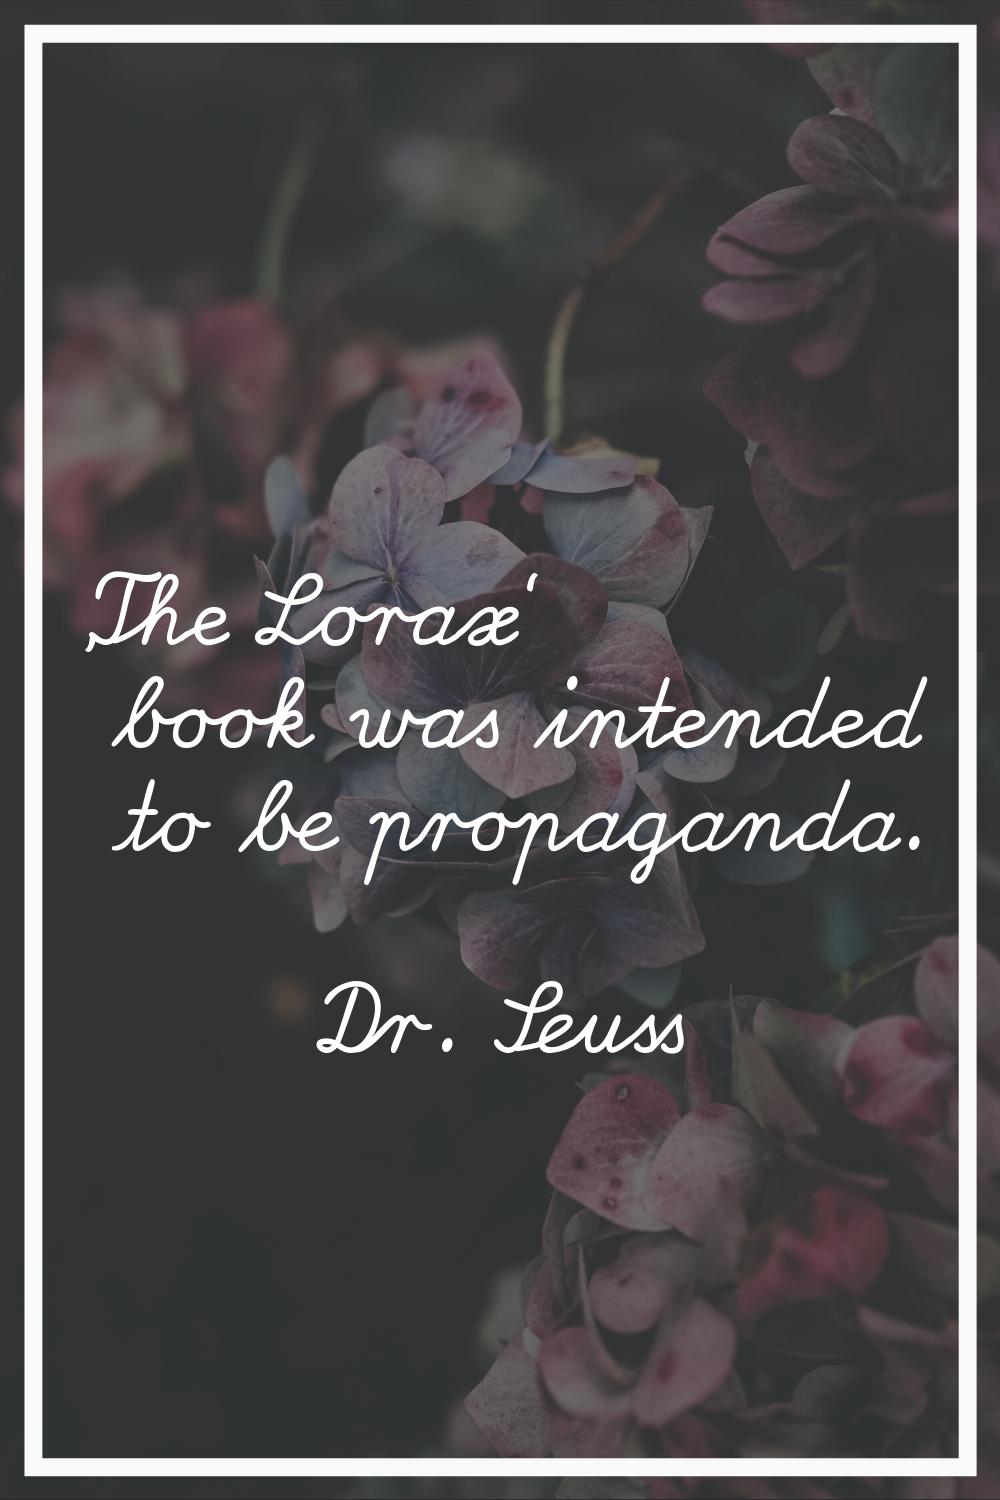 'The Lorax' book was intended to be propaganda.